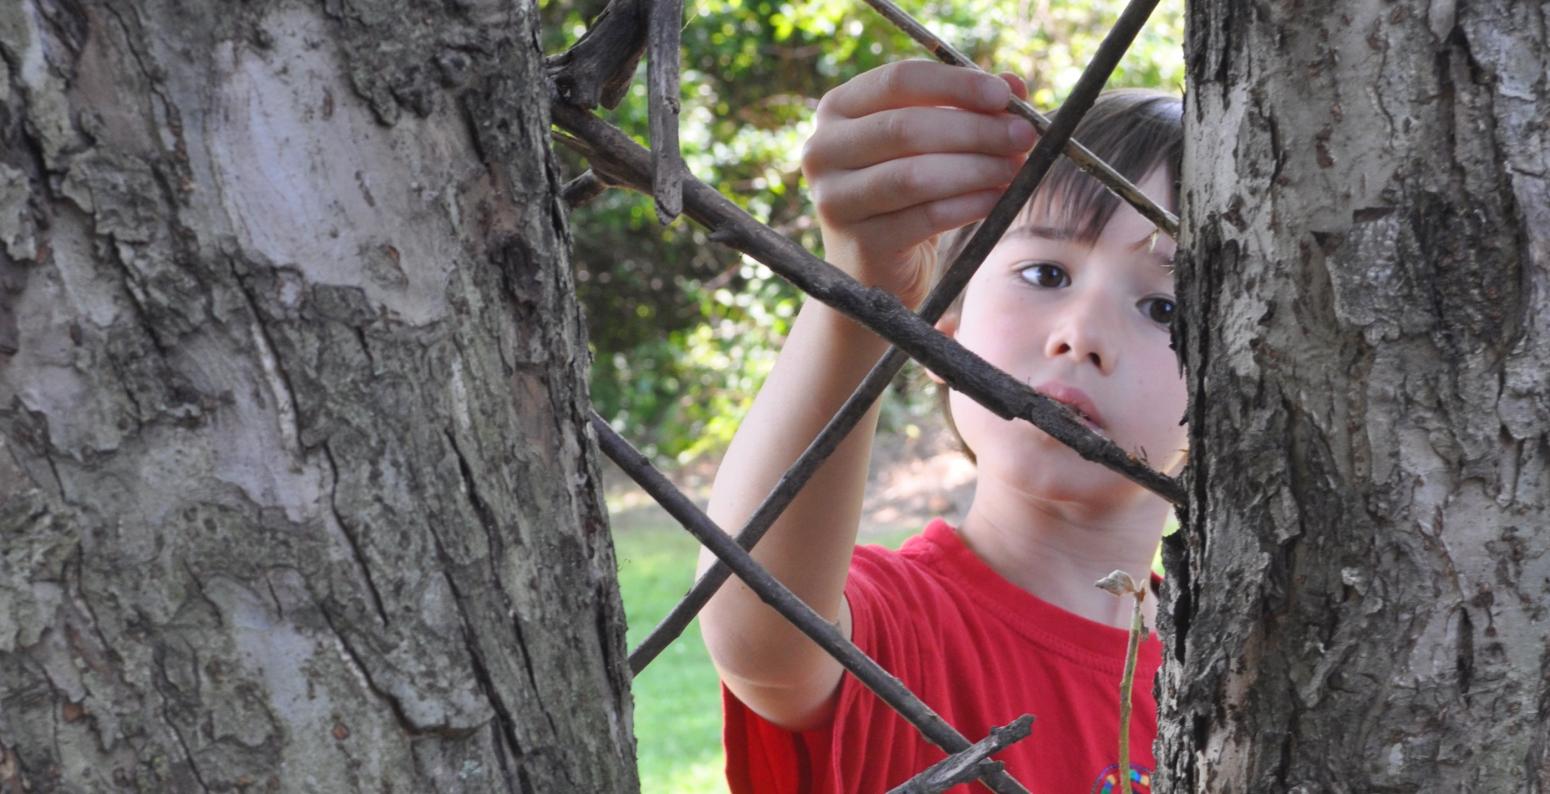 A child carefully places twigs between two tree trunks to create a diamond pattern sculpture.